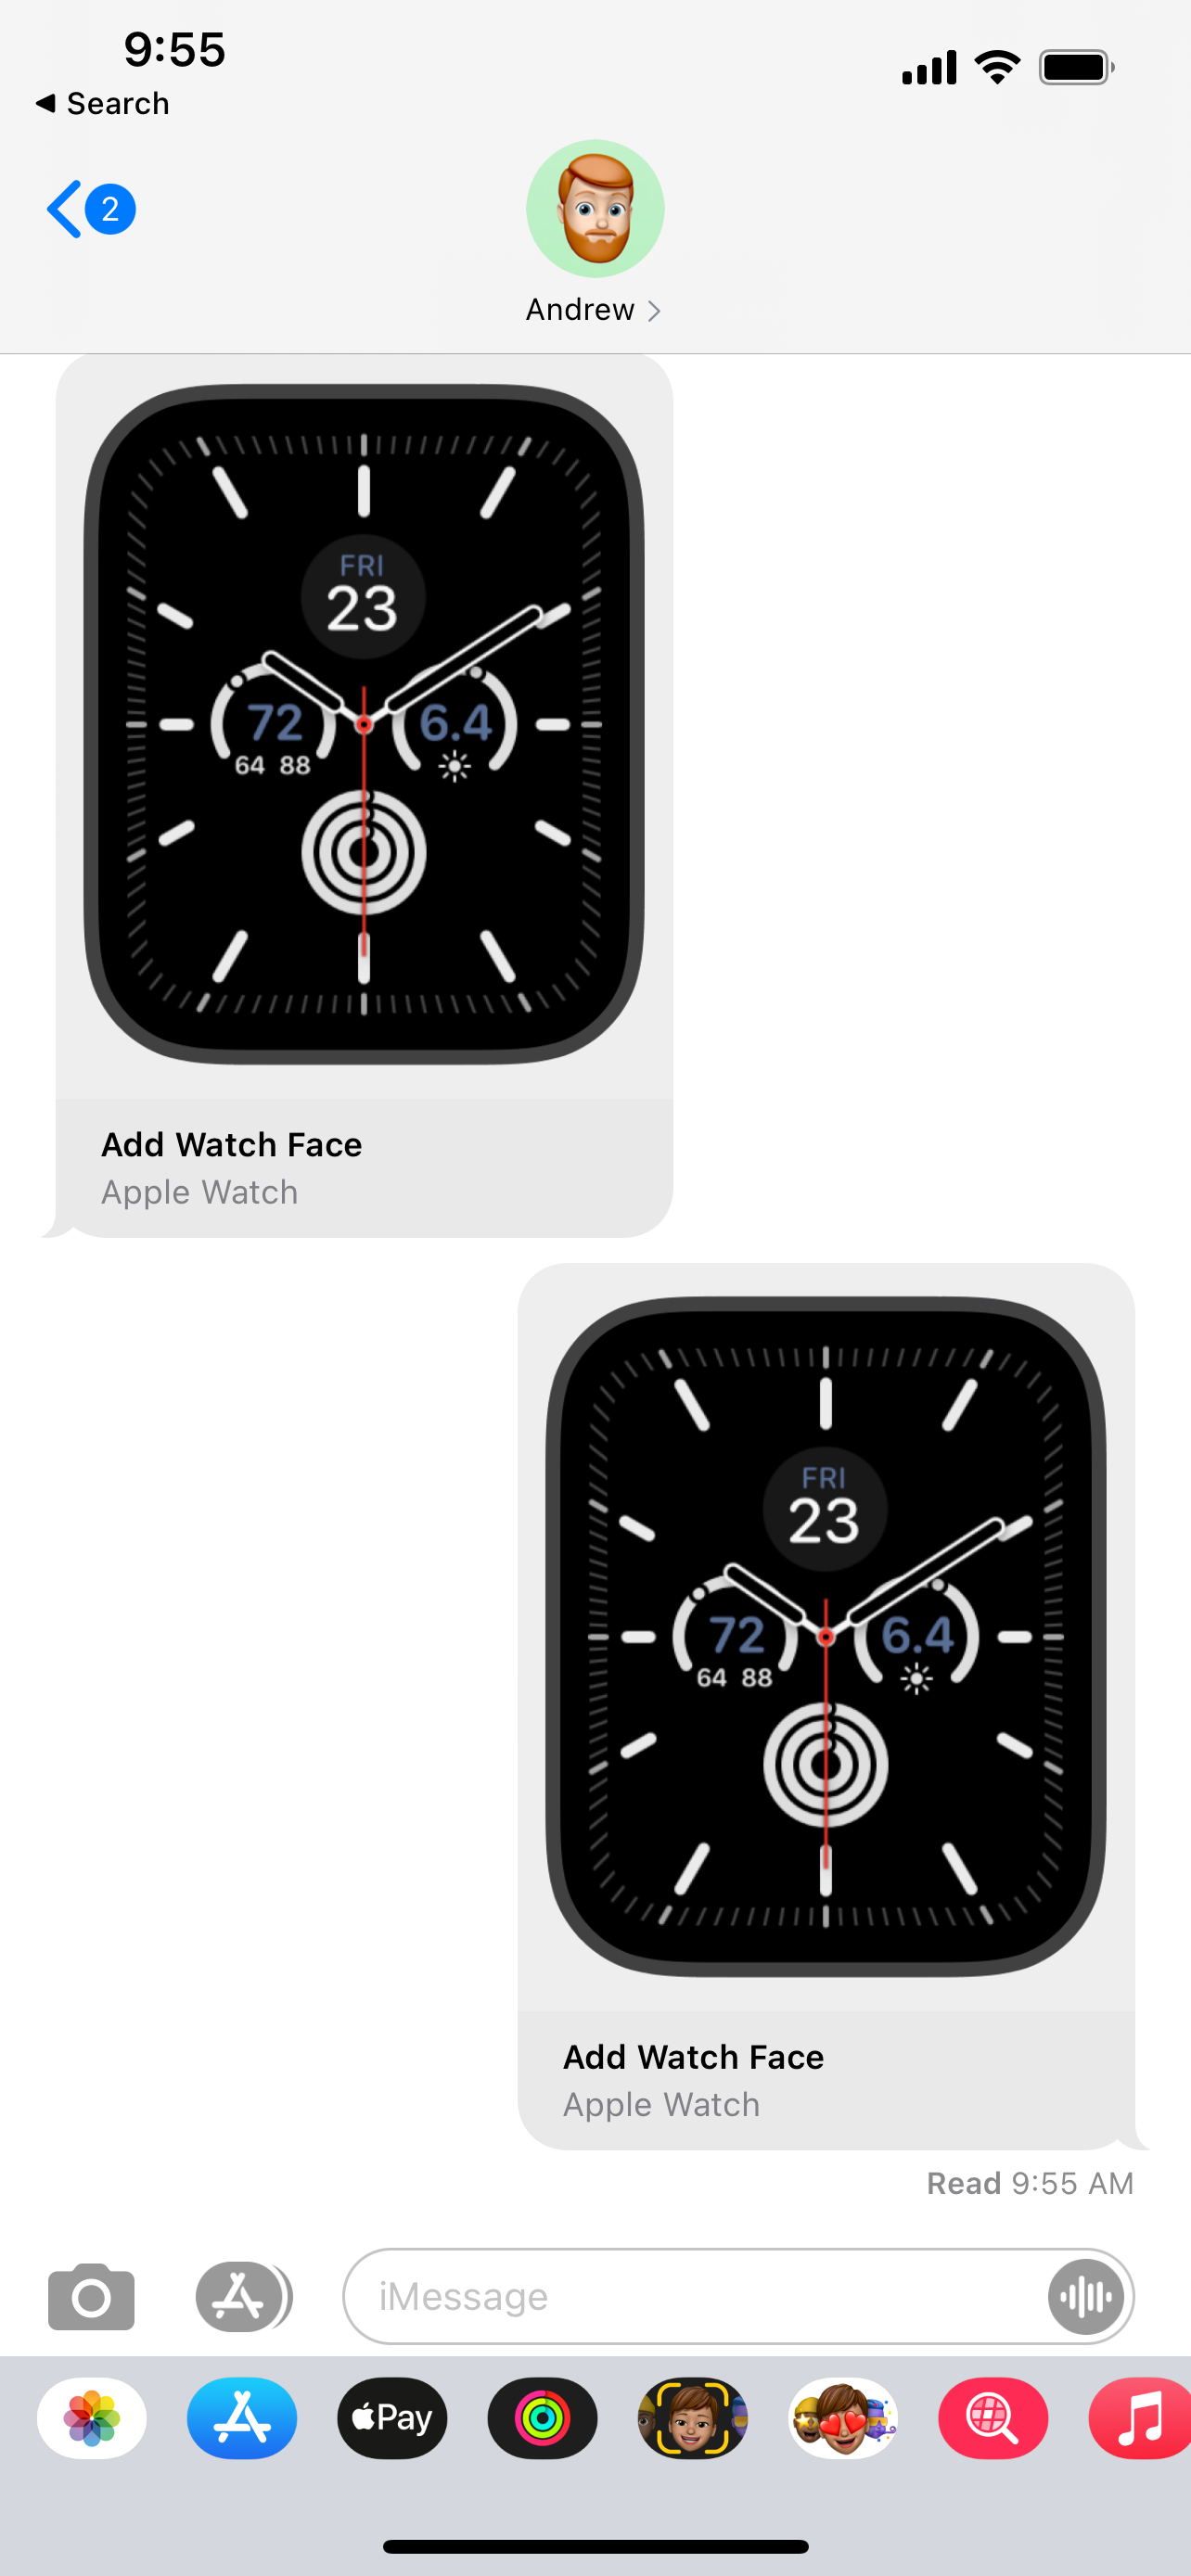 Shared Apple Watch Face in Messages